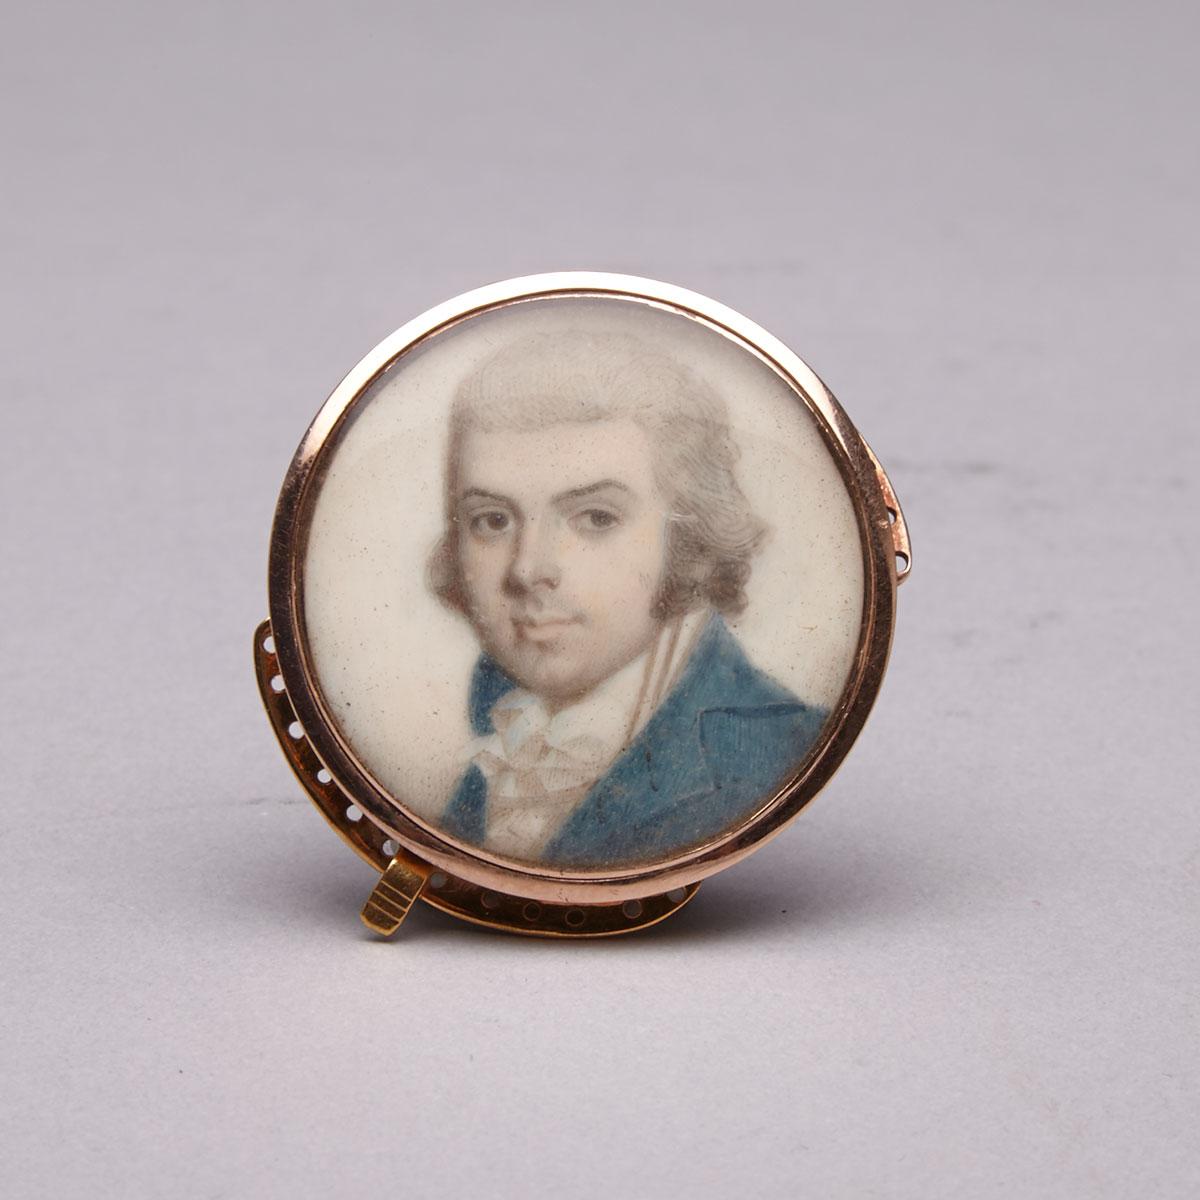 British School Portrait Miniature on Ivory, late 18th/early 19th century